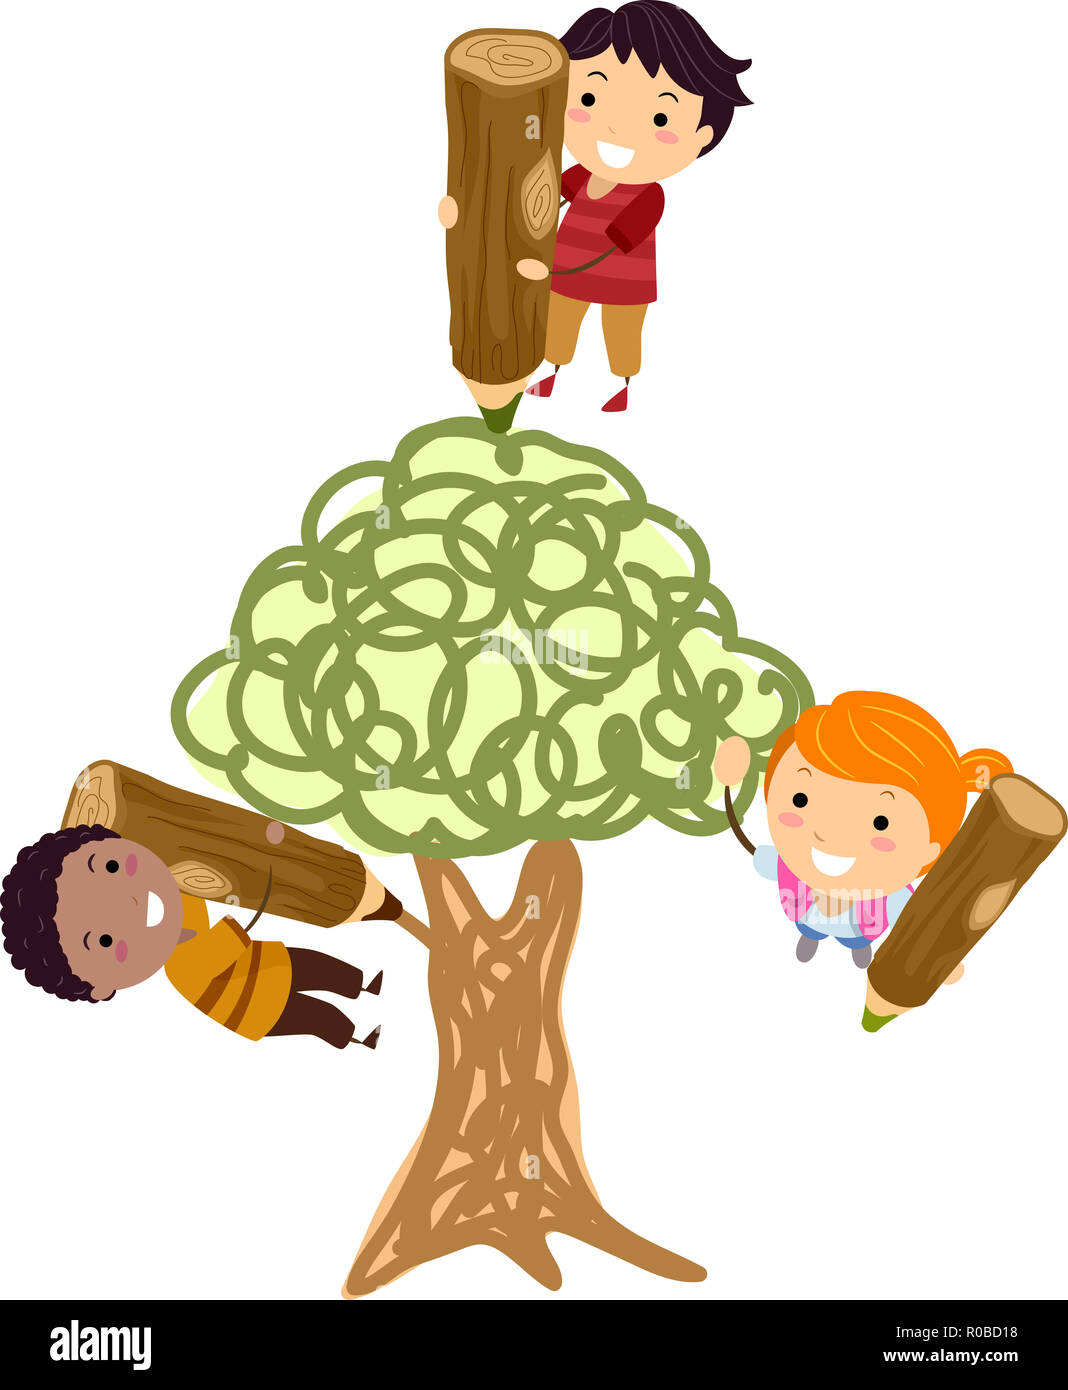 Illustration of Stickman Kids Holding Wooden Pencil and Drawing a Tree Stock Photo